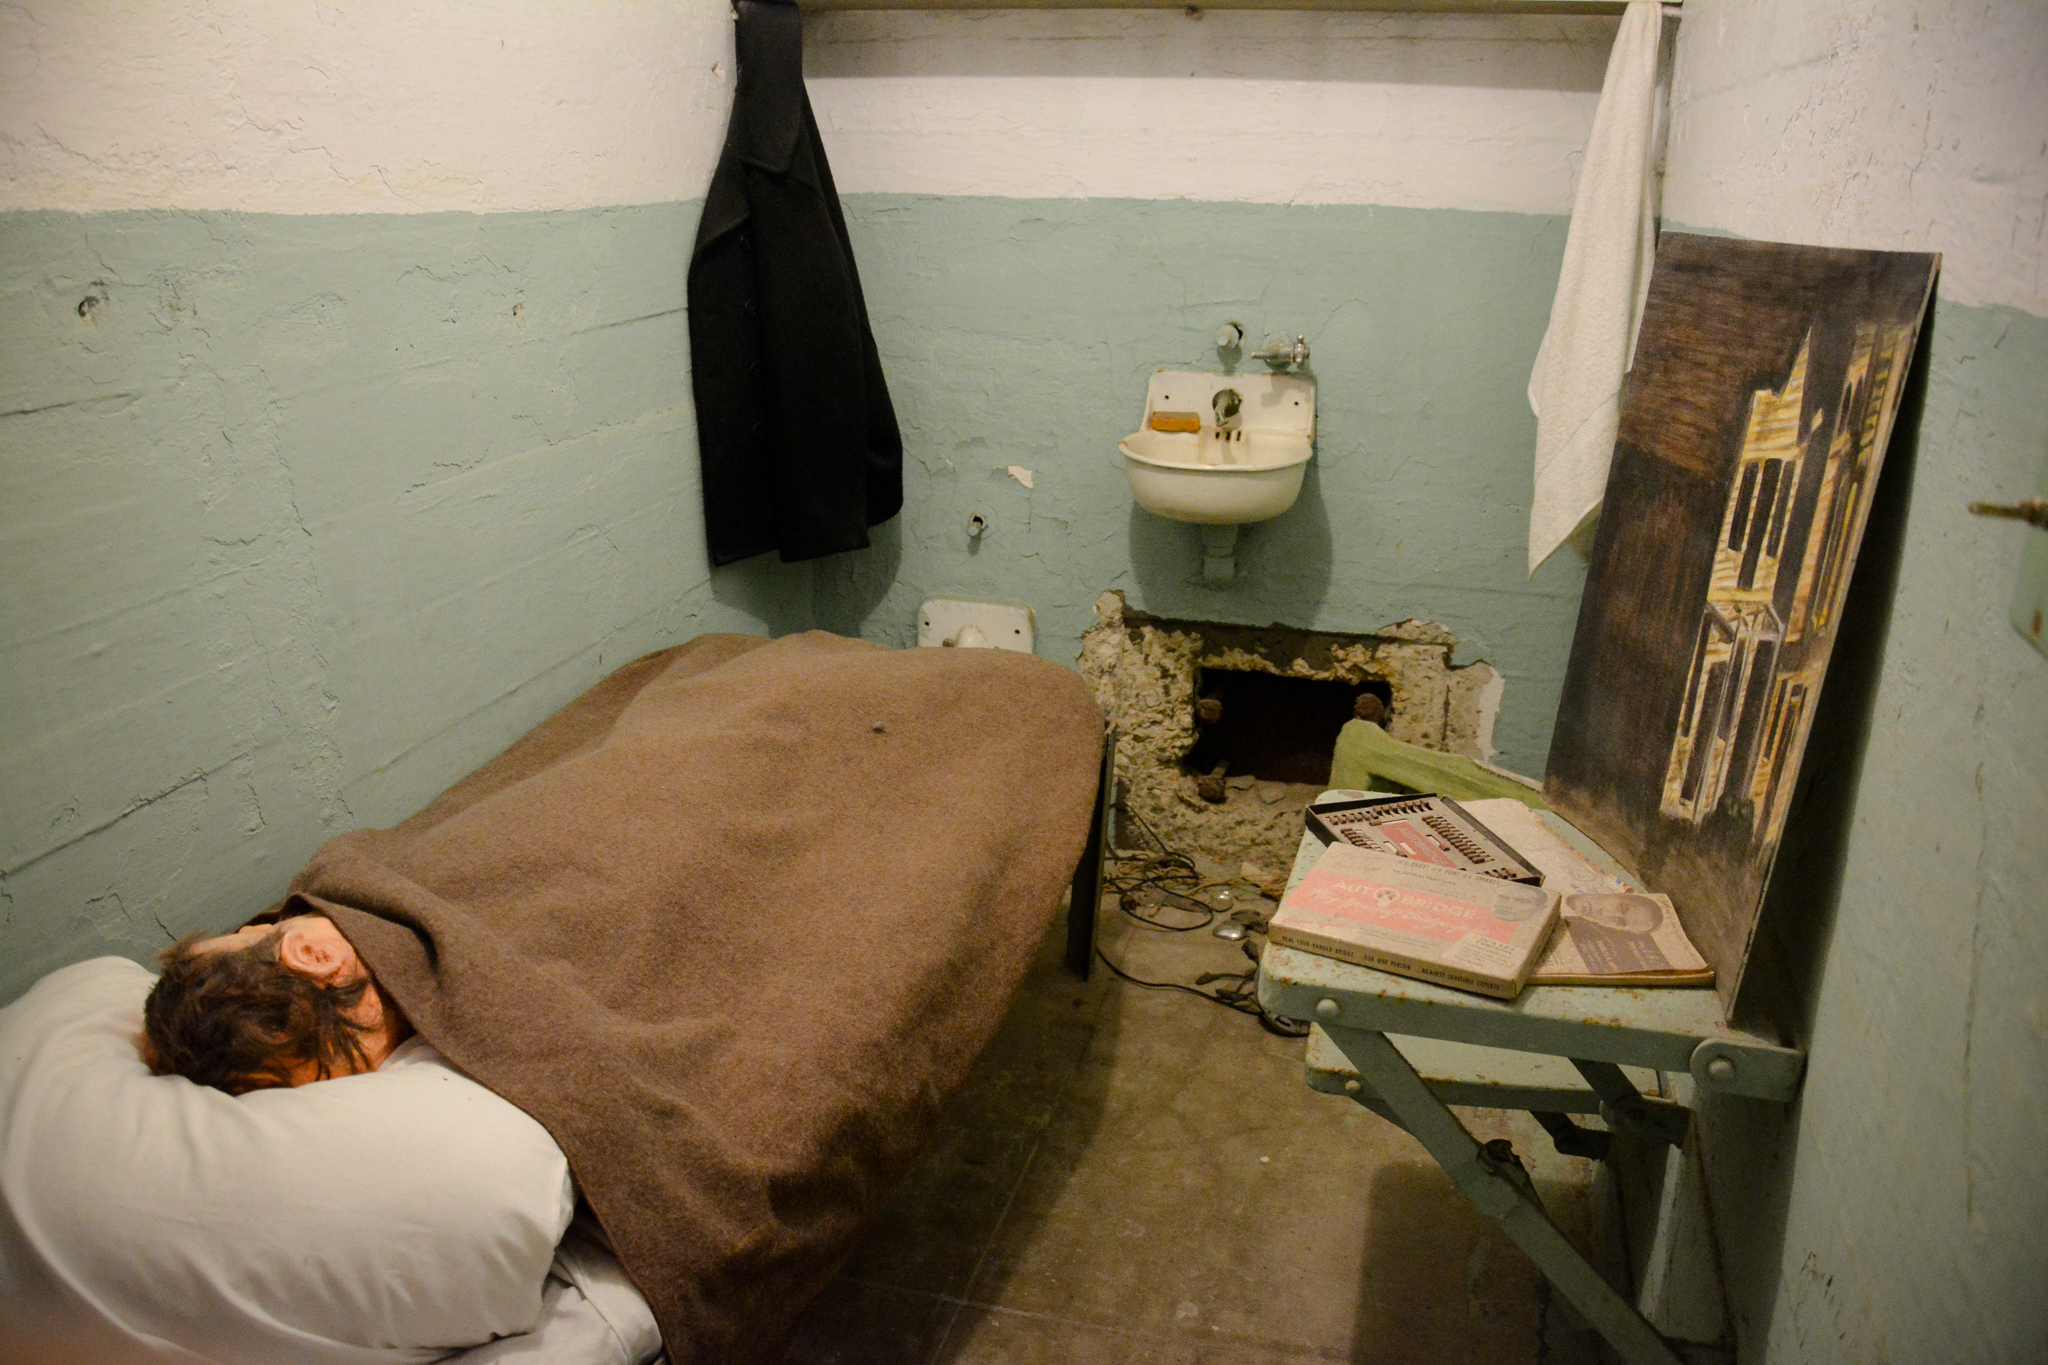 Cell in Alcatraz during the night tour